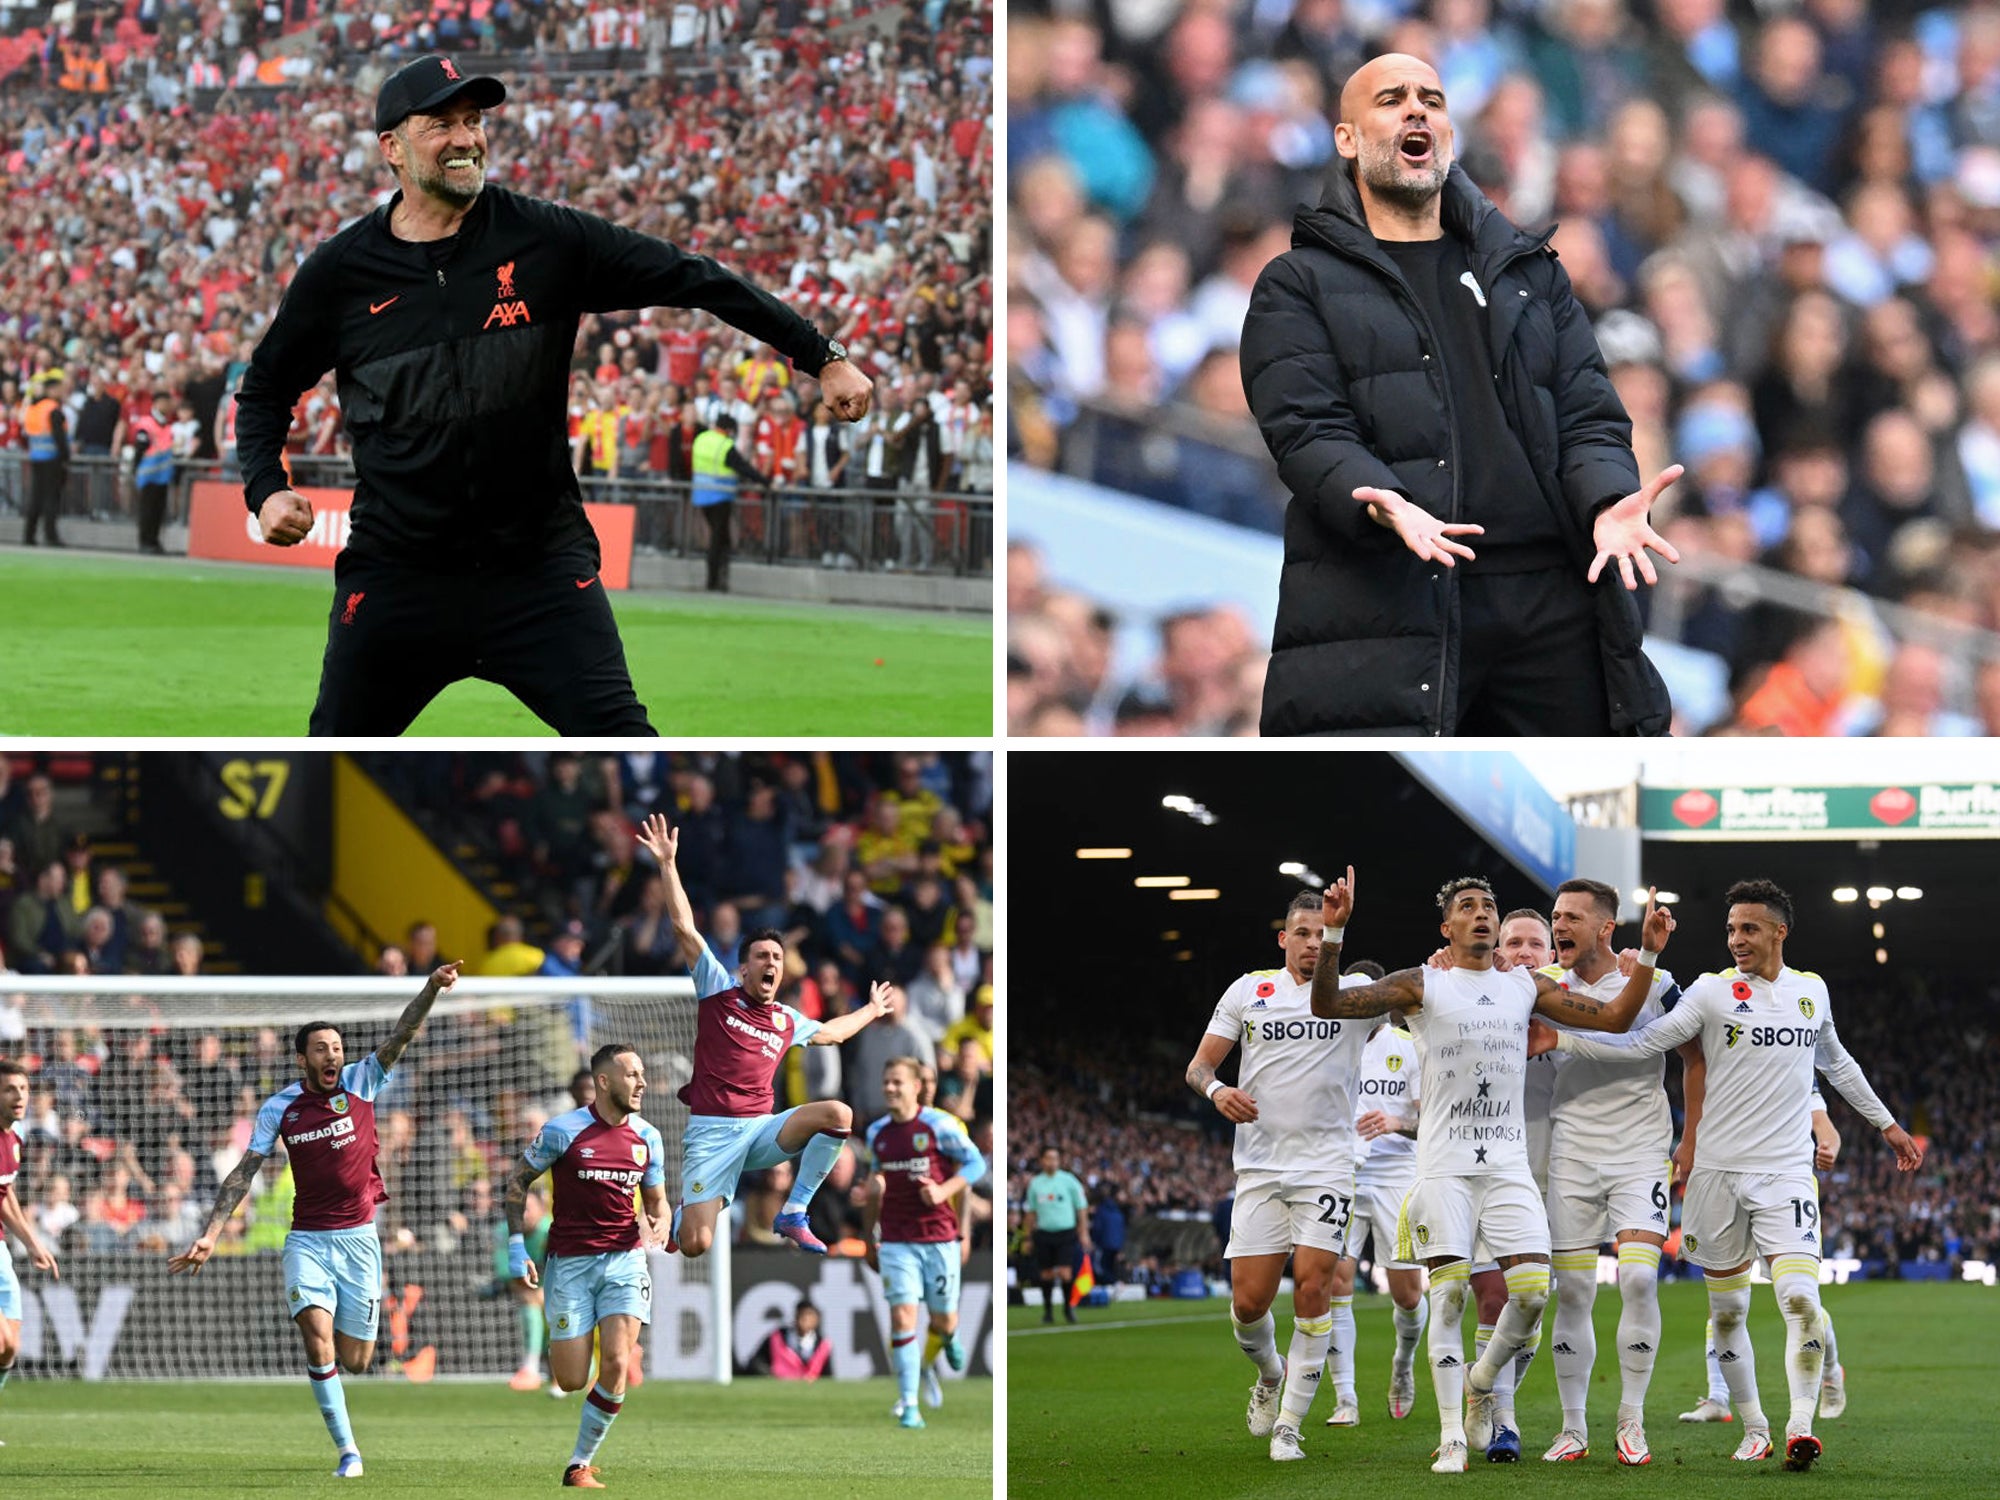 Manchester City and Liverpool are fighting for the title on the final day while either Burnley or Leeds will be relegated